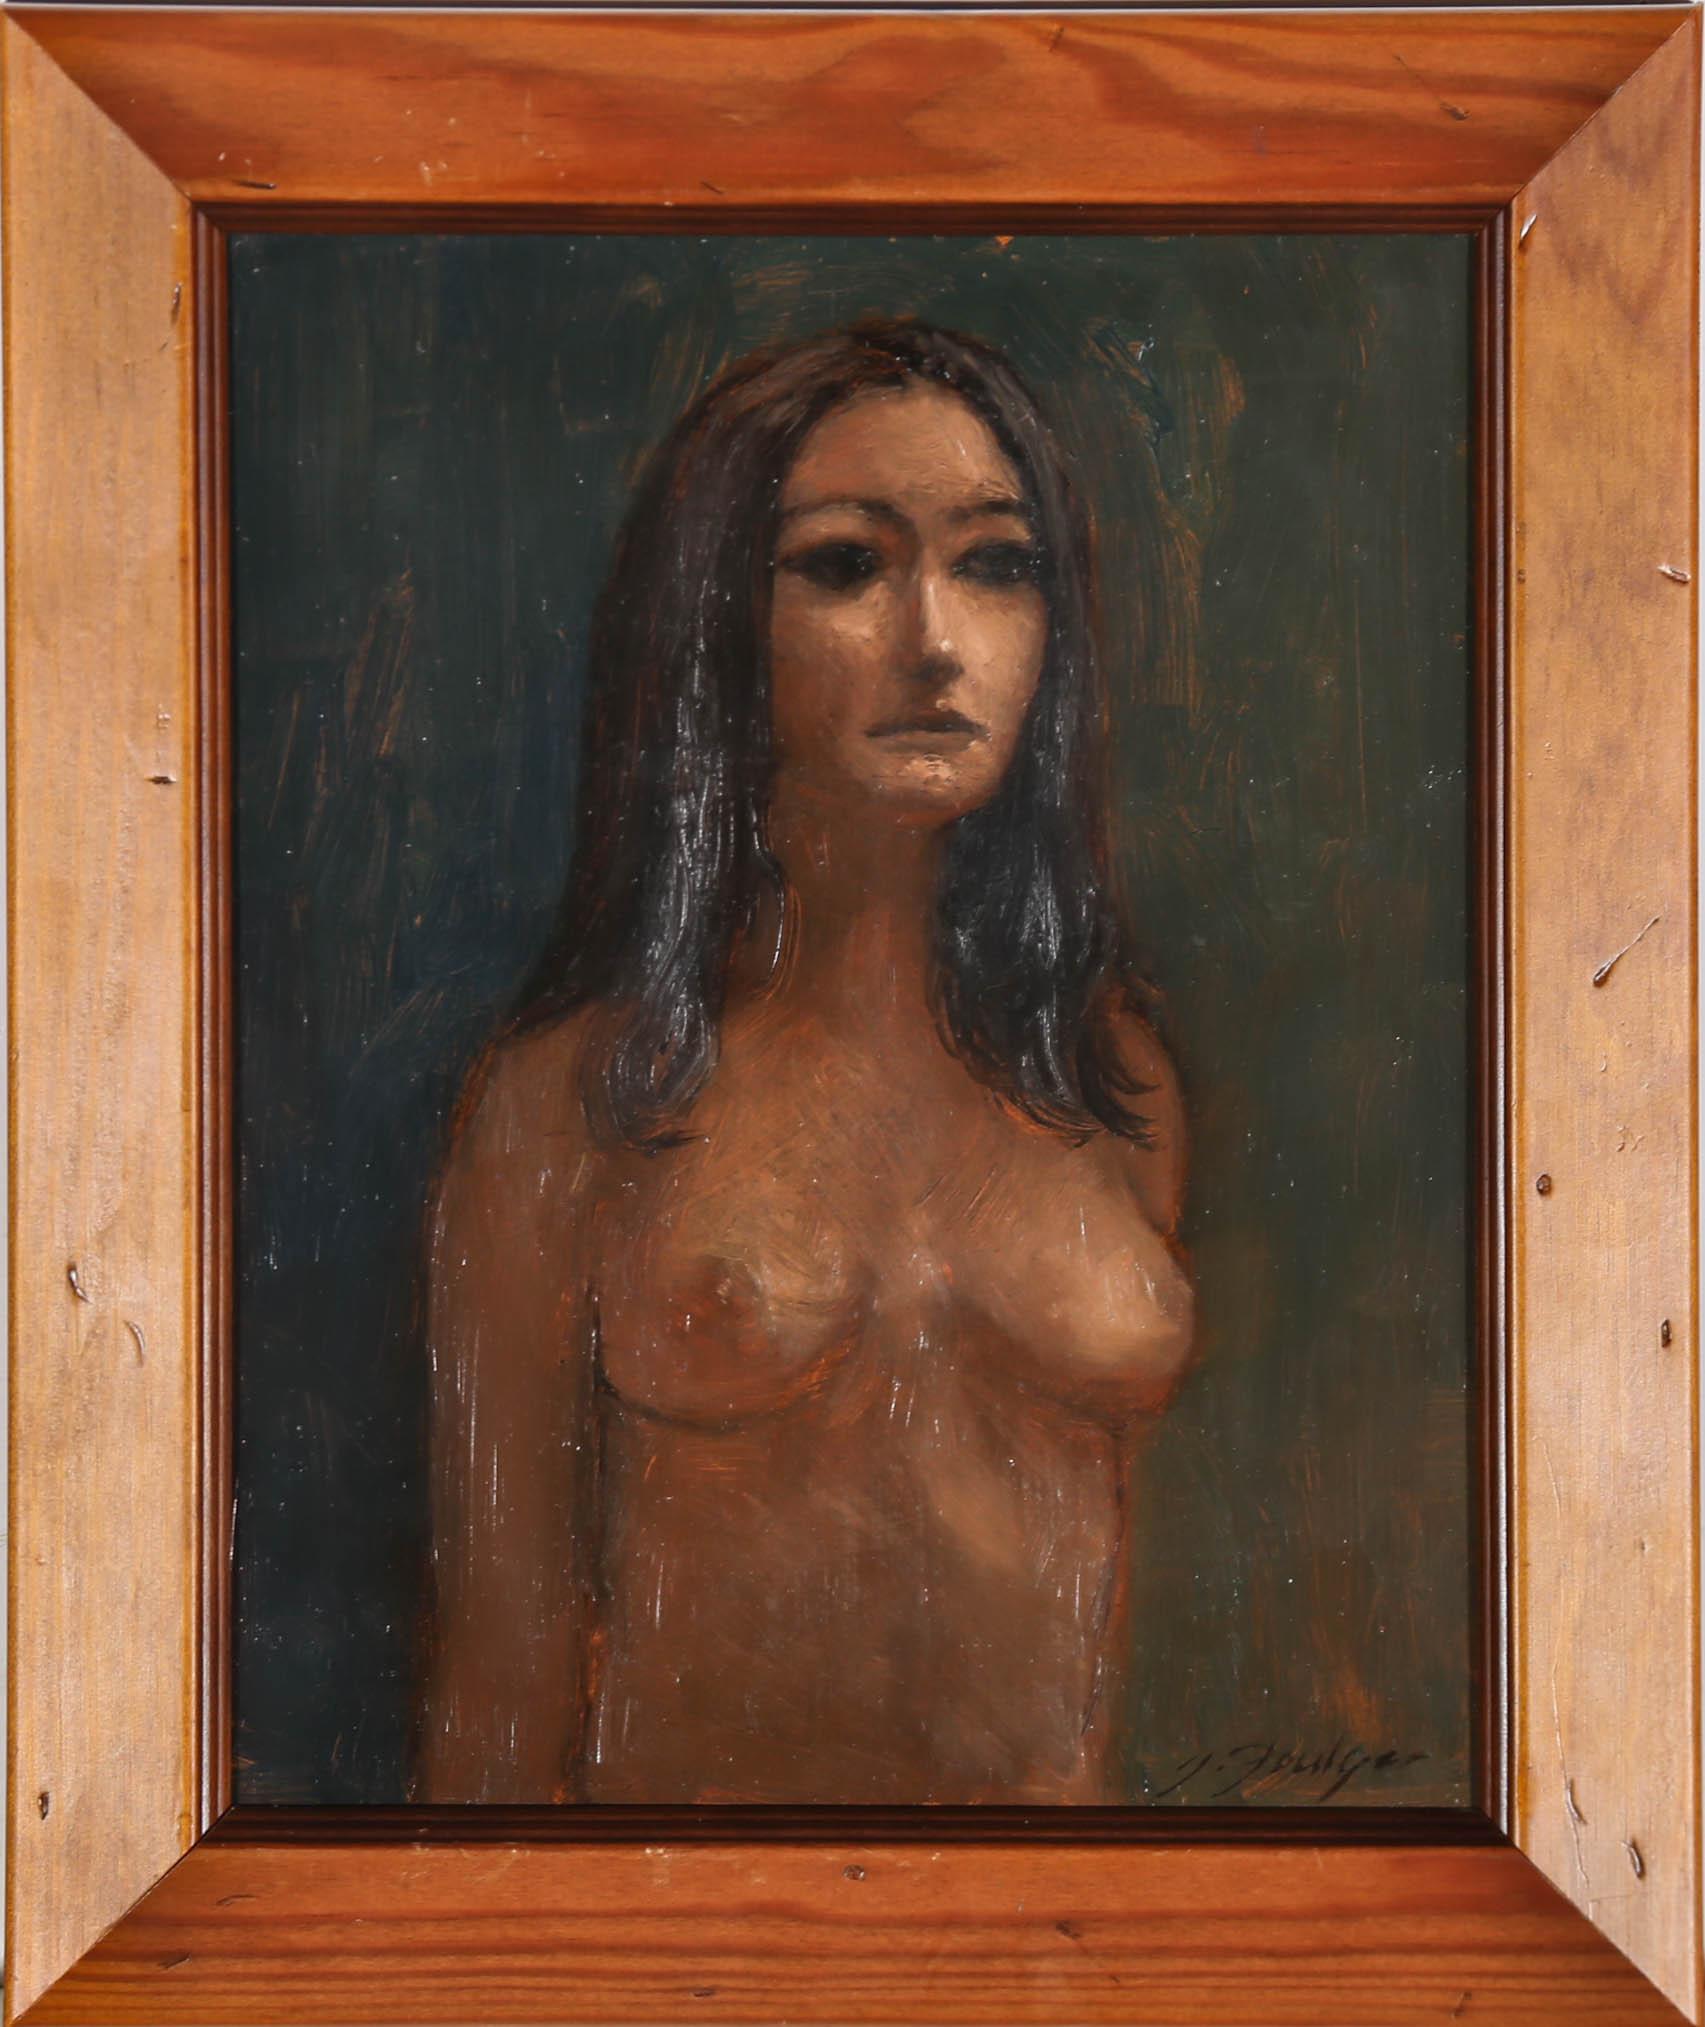 An original acrylic study by 20th century British artist, John Foulger (1943-2007). Well-presented in smart wood frame. Signed 'J. Foulger' to the lower right. With a second artist signature and inscription verso. On board. 